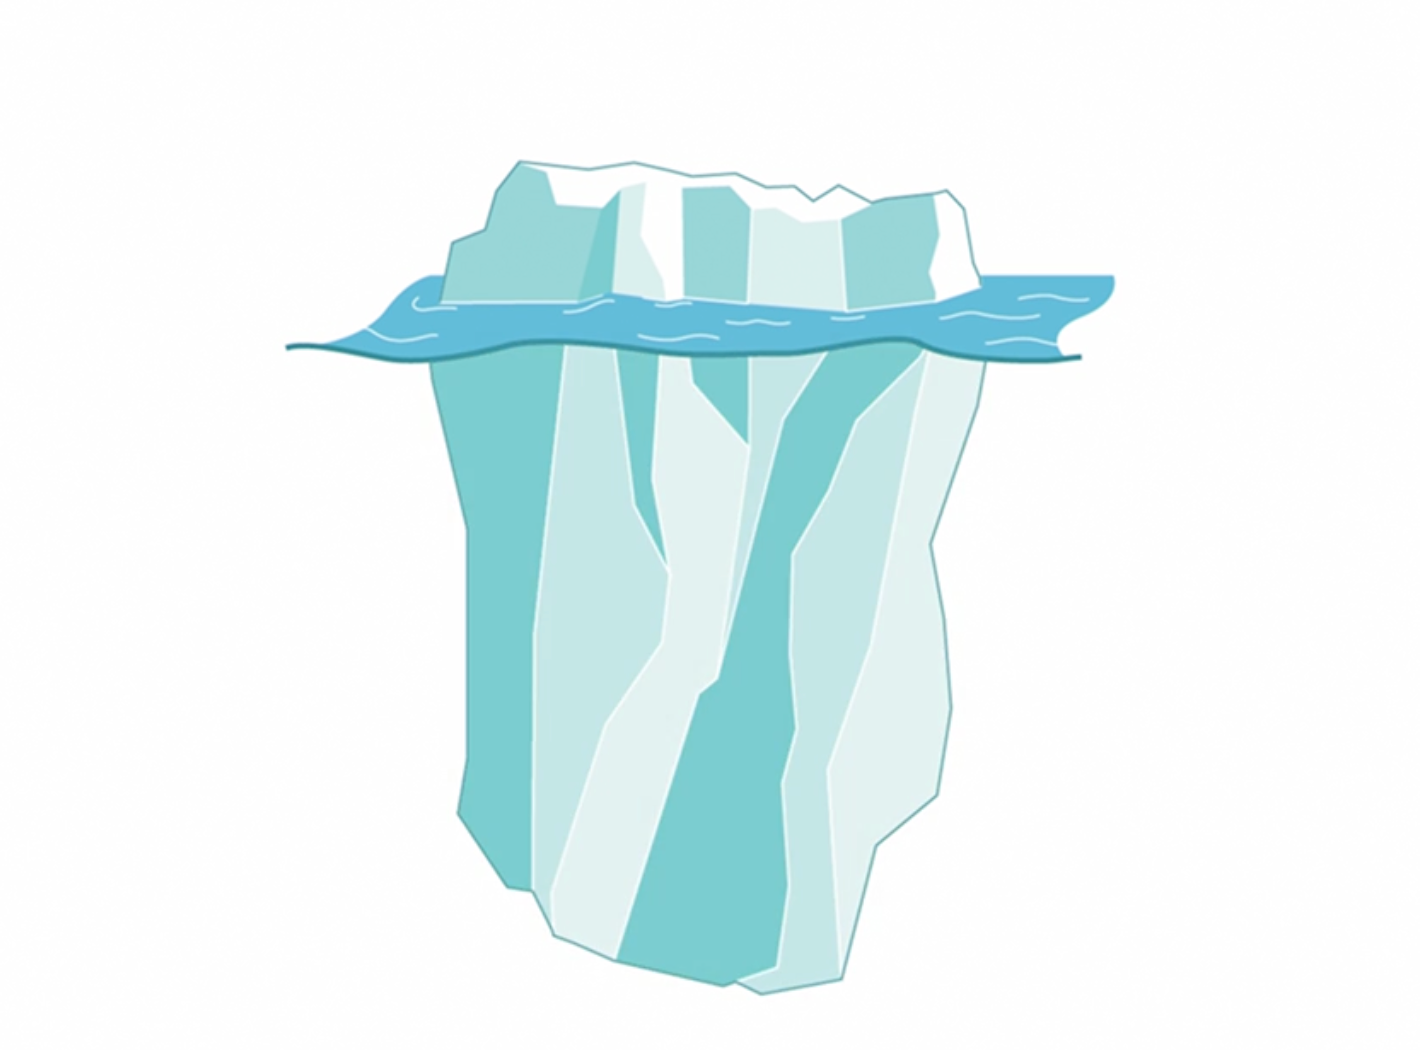 Iceberg model: 10 percent of its total mass above water and the other 90 percent underwater